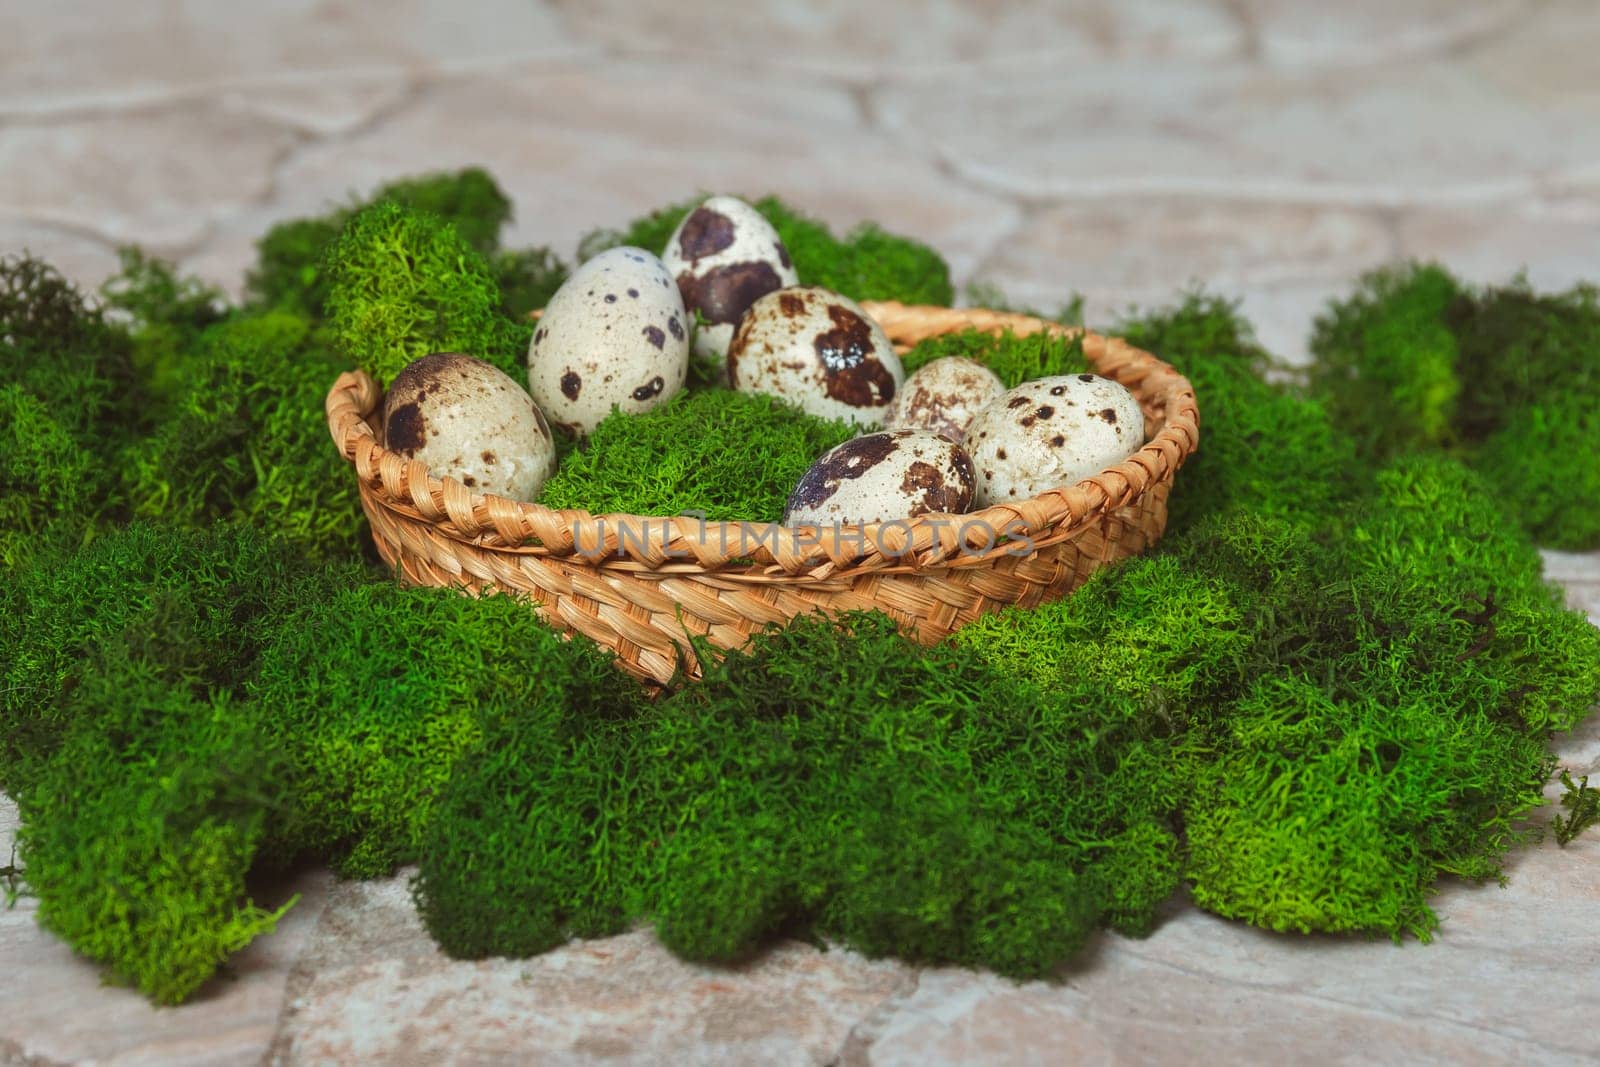 Quail eggs lie among green moss in a wicker basket on a stone background by ElenaNEL